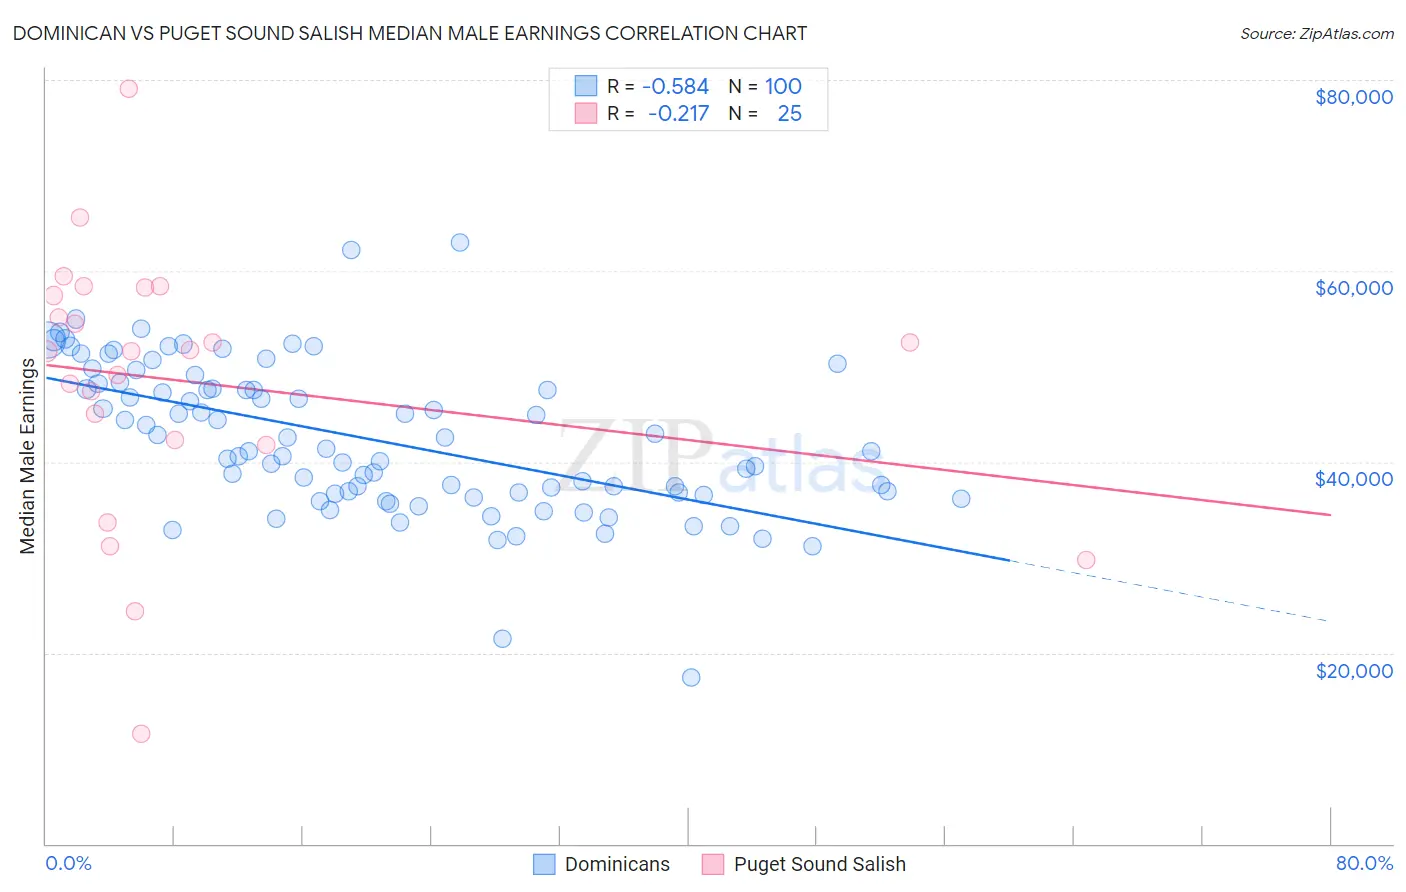 Dominican vs Puget Sound Salish Median Male Earnings